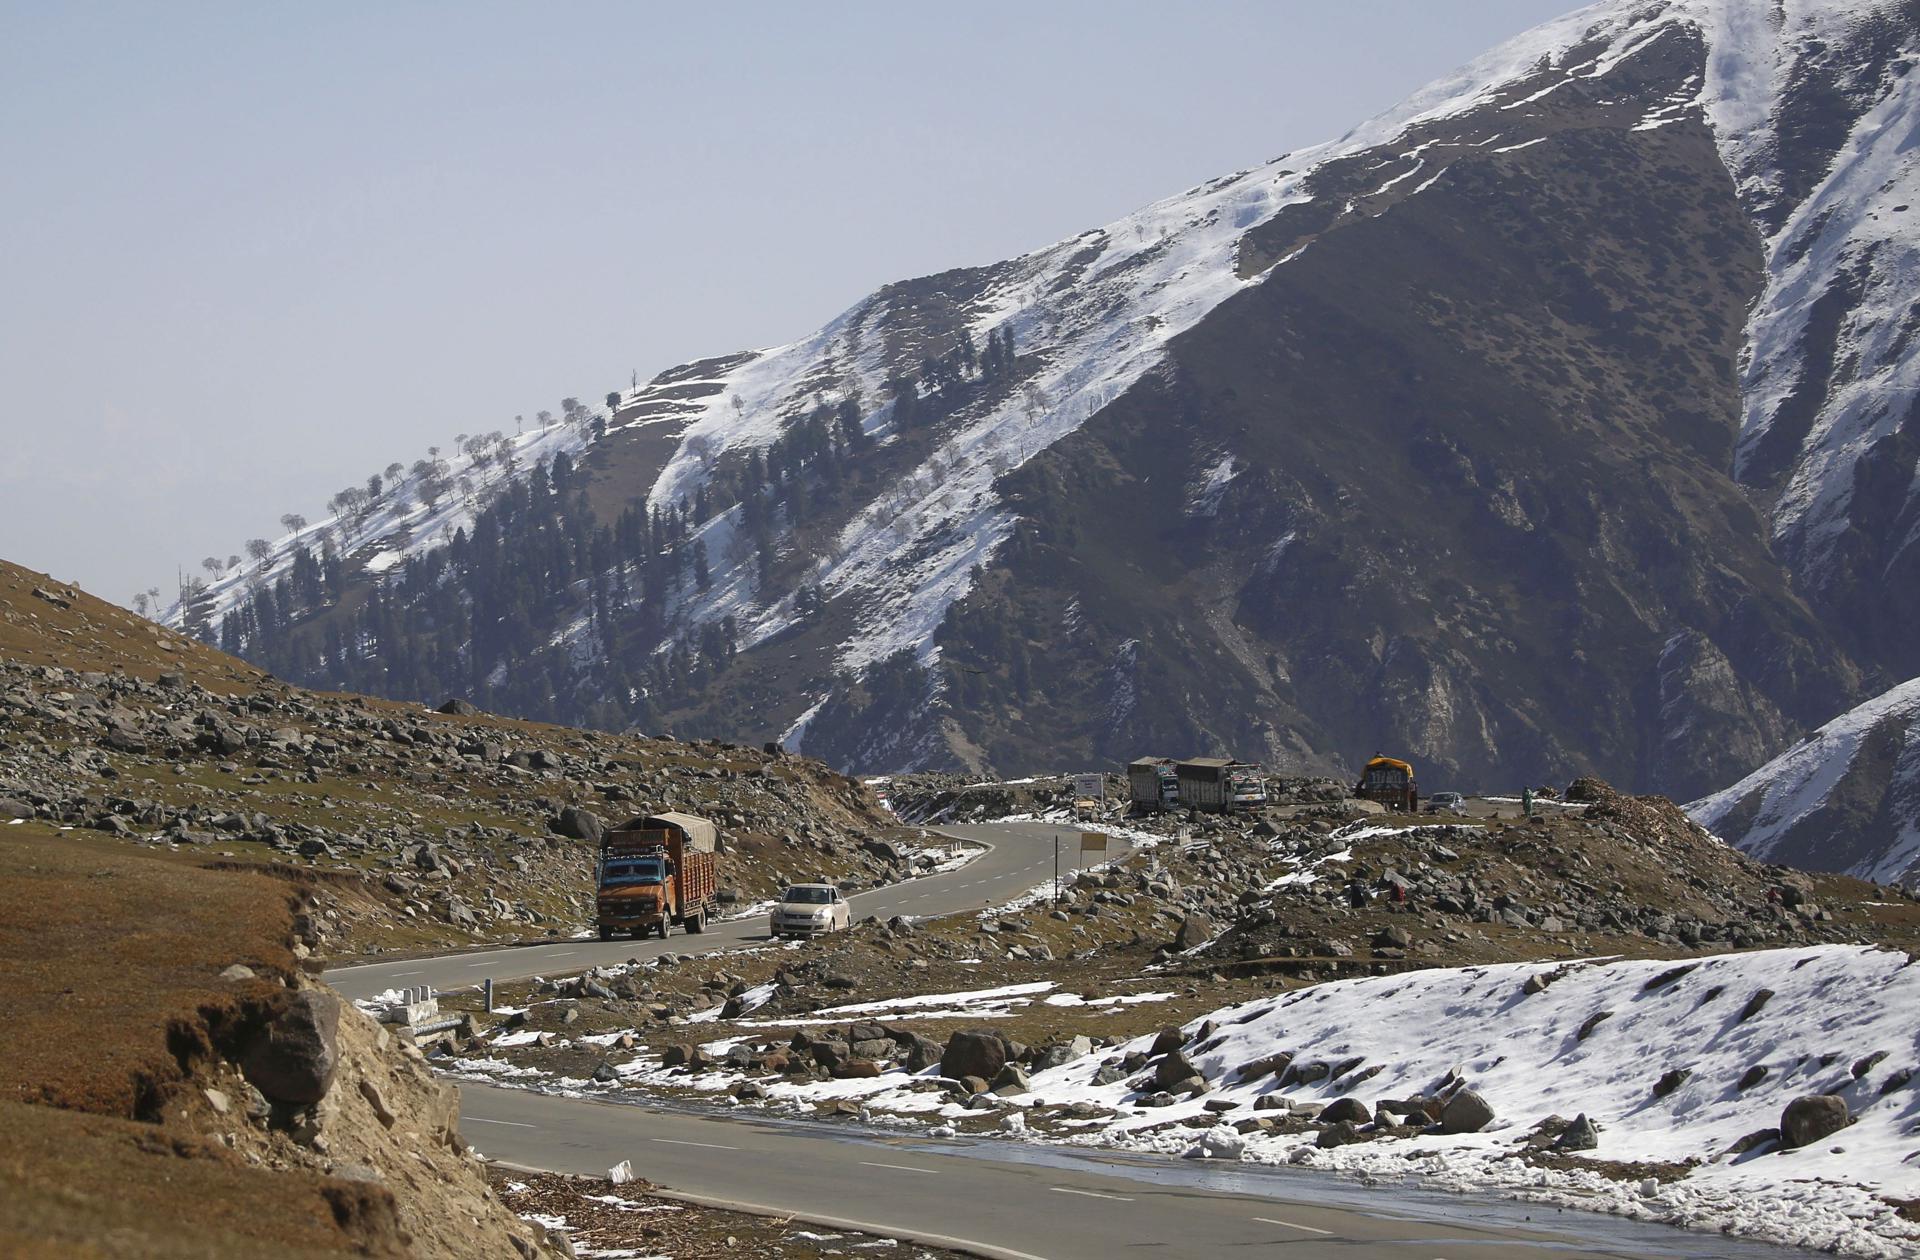 (FILE) Vehicles cross a road near snow covered mountains at Mughal Road, some 80 kilometers south of Srinagar, the summer capital of Indian Kashmir, India. EFE/EPA/FAROOQ KHAN